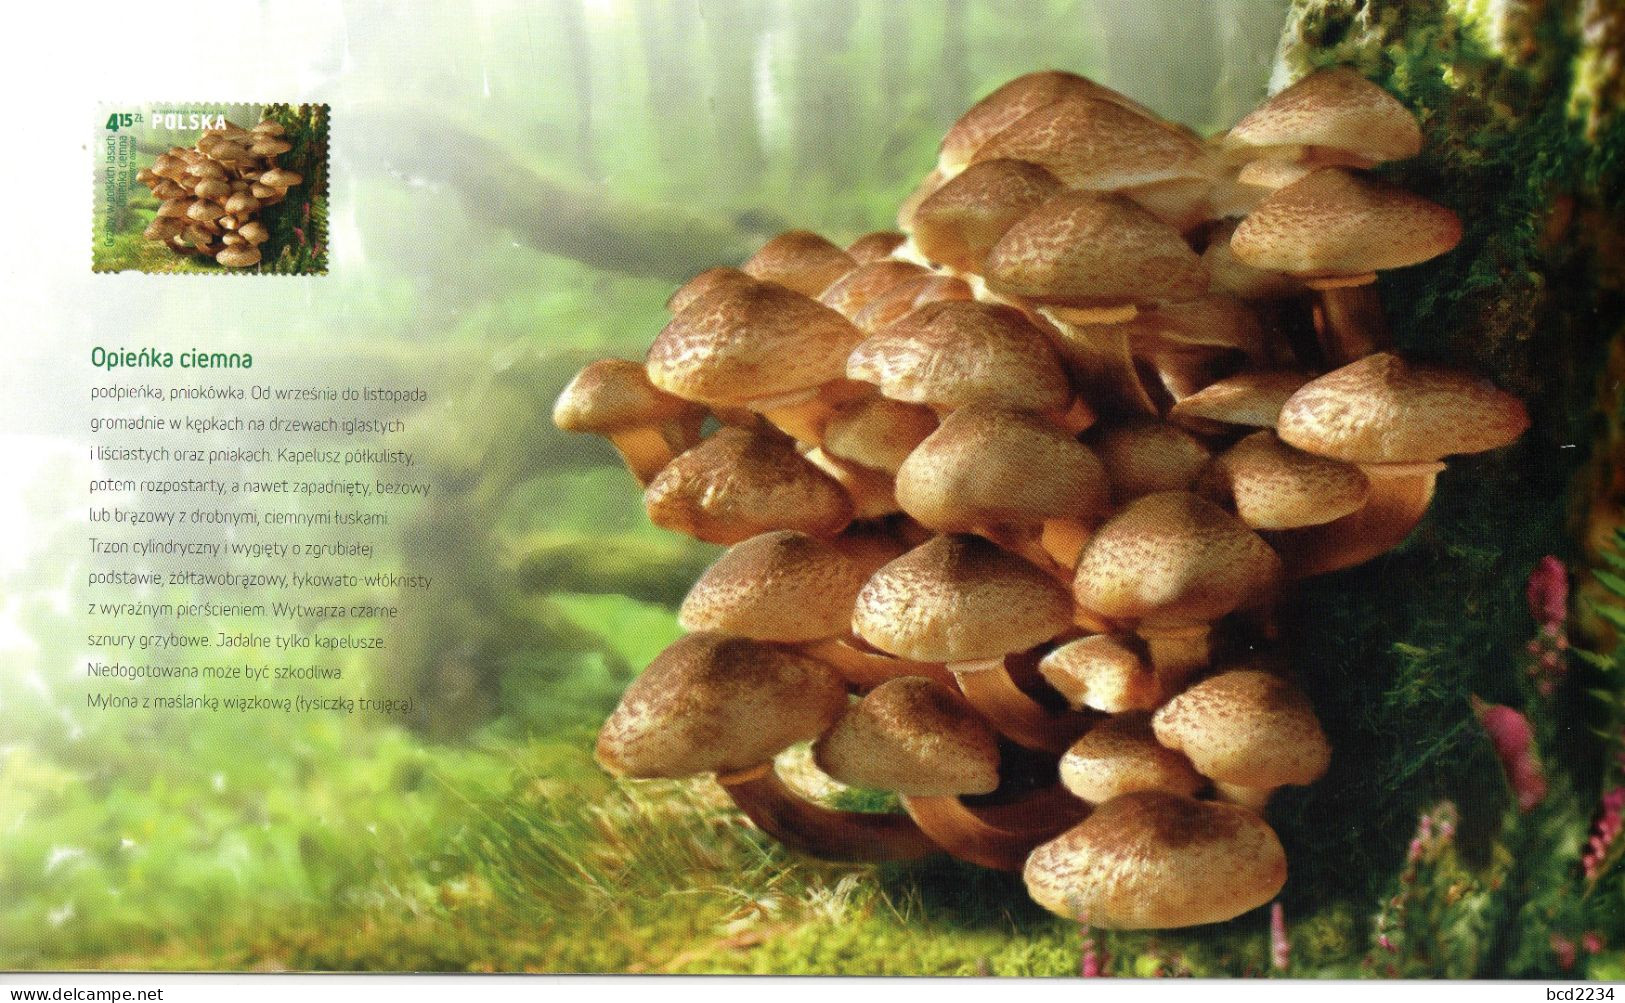 POLAND 2012 POLISH POST OFFICE LIMITED EDITION SPECTACULAR FOLDER: MUSHROOMS IN POLISH FORESTS FDC FUNGI